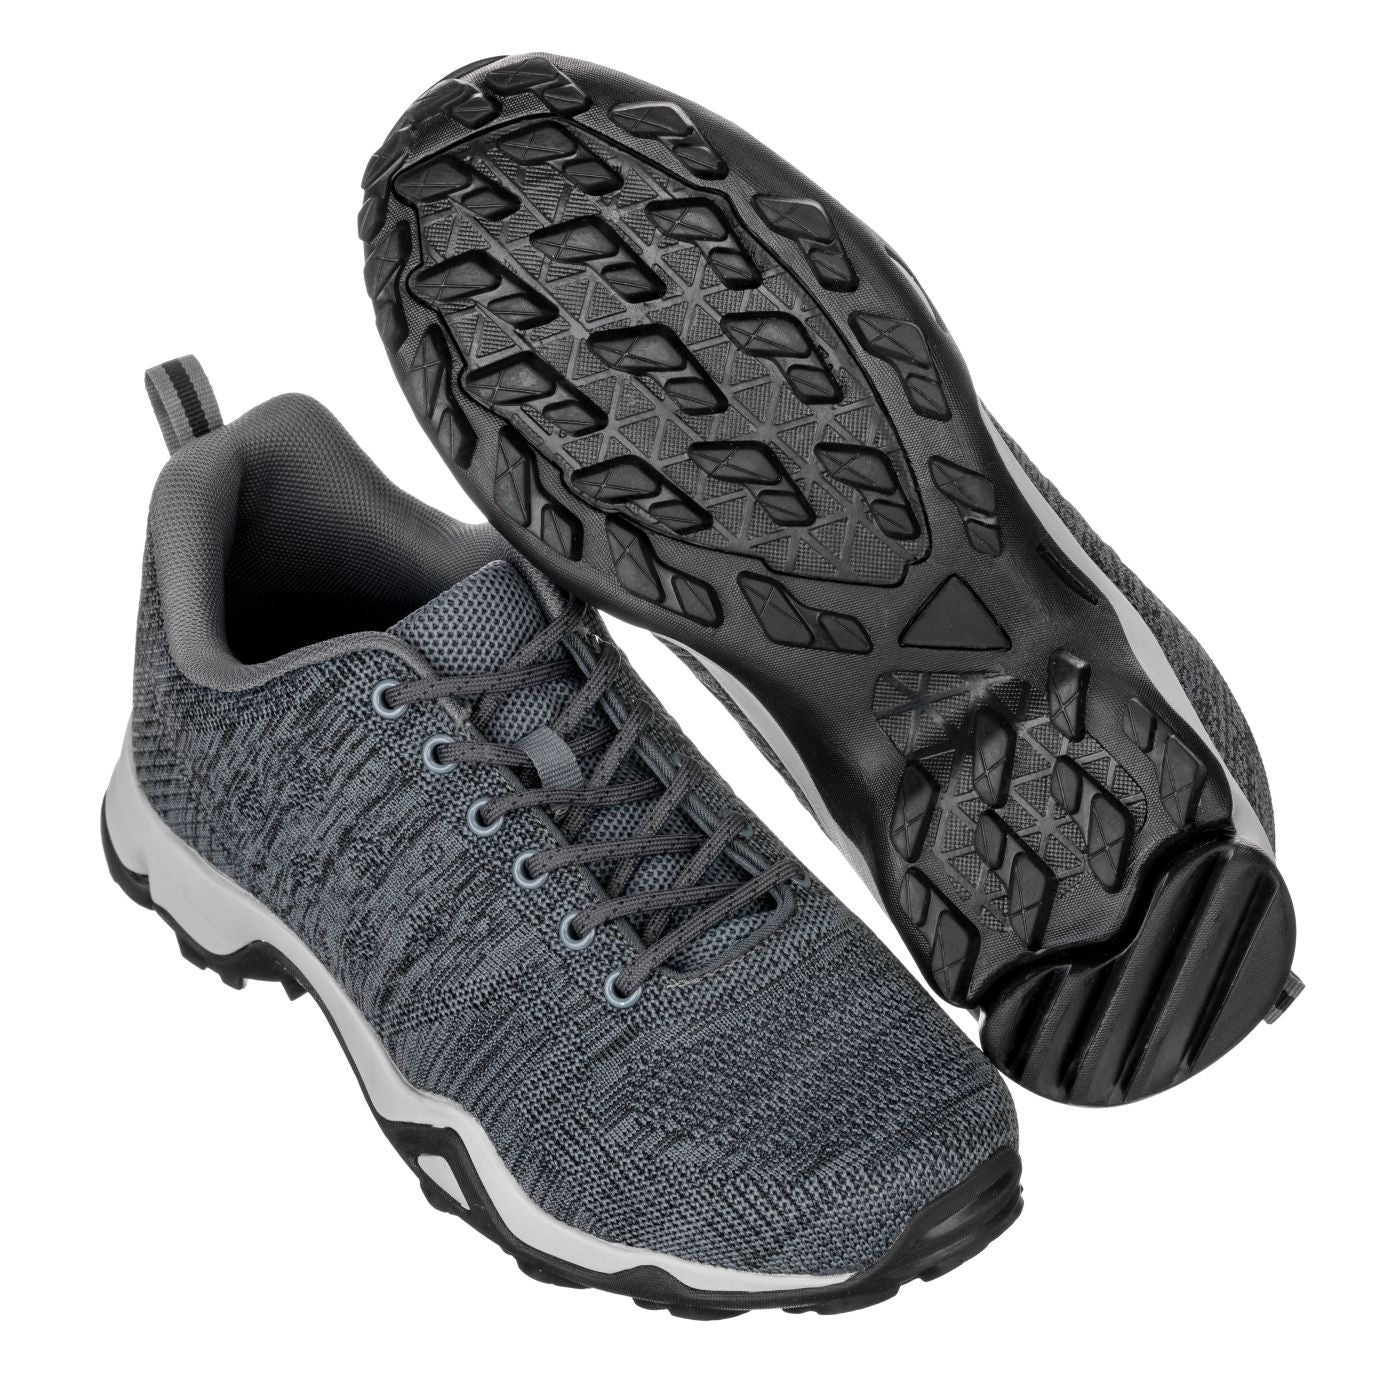 Elevator shoes height increase CALTO - Q104 - 2.4 Inches Taller (Grey/Black) - Super Lightweight